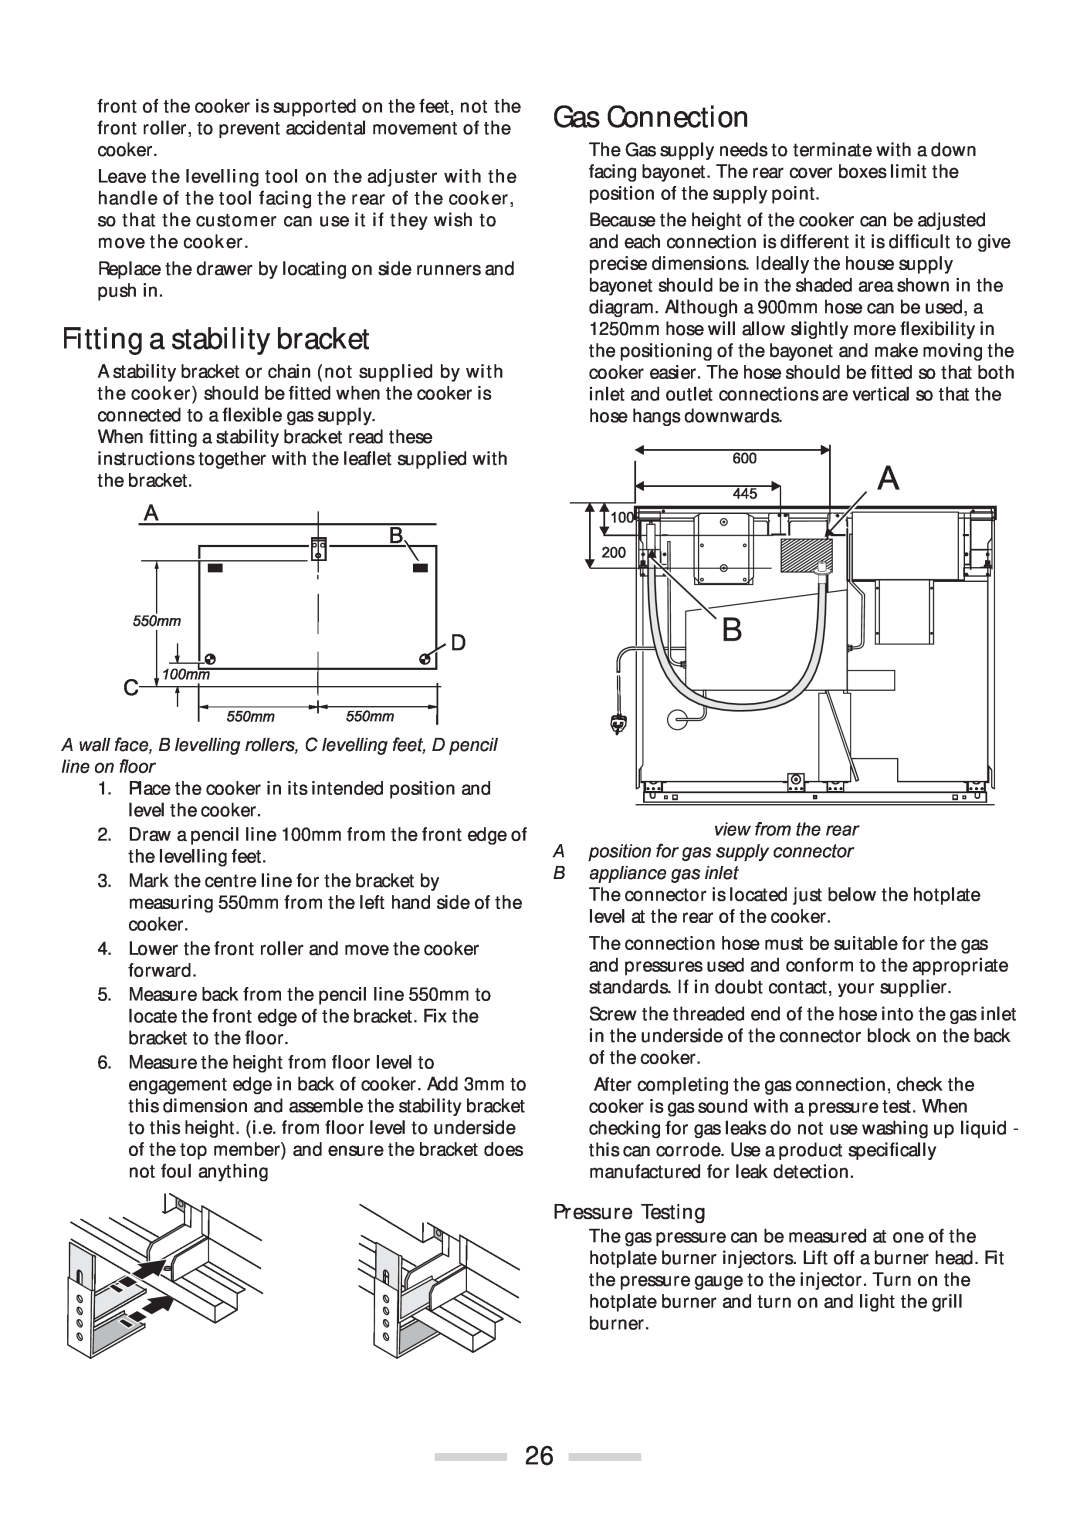 Rangemaster 110 installation instructions Fitting a stability bracket, Gas Connection, Pressure Testing 